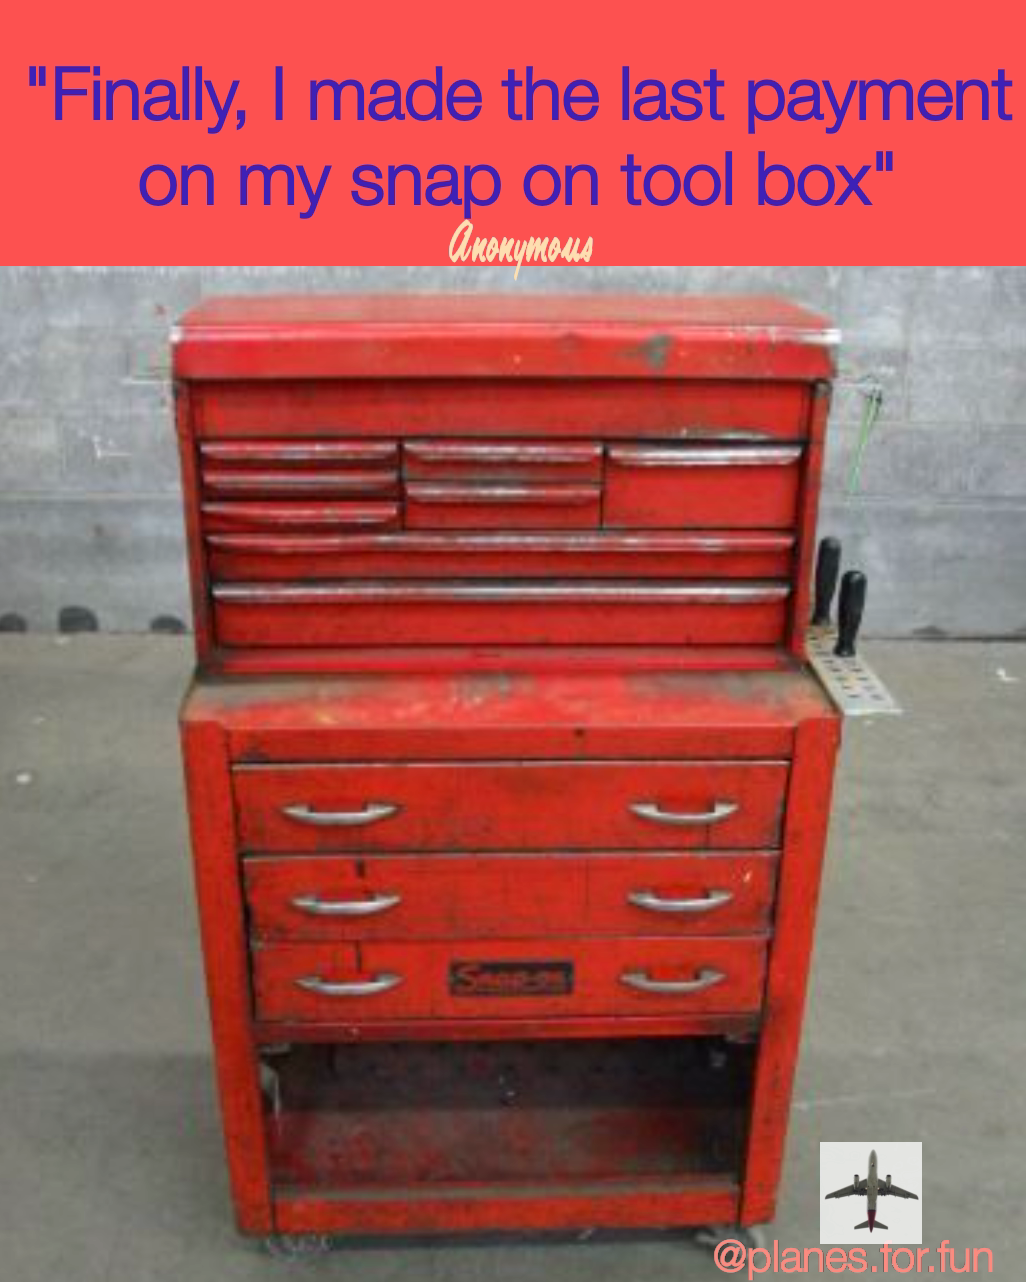 @planes.for.fun "Finally, I made the last payment on my snap on tool box" Anonymous